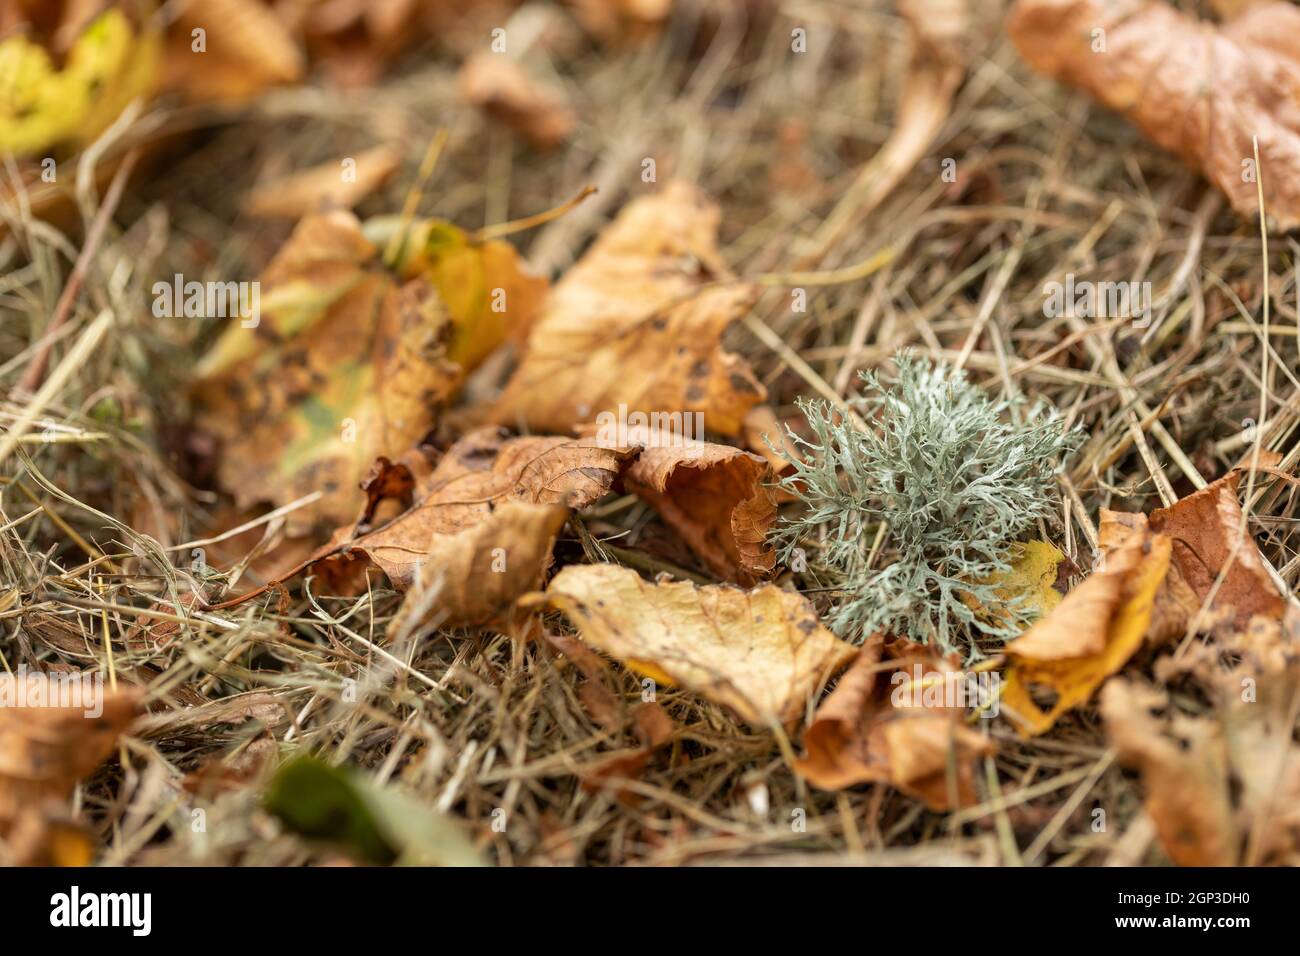 Small ball of green / grey lichen found amongst dried grass and leaves on the forest floor, in September, Wiltshire, England, UK Stock Photo